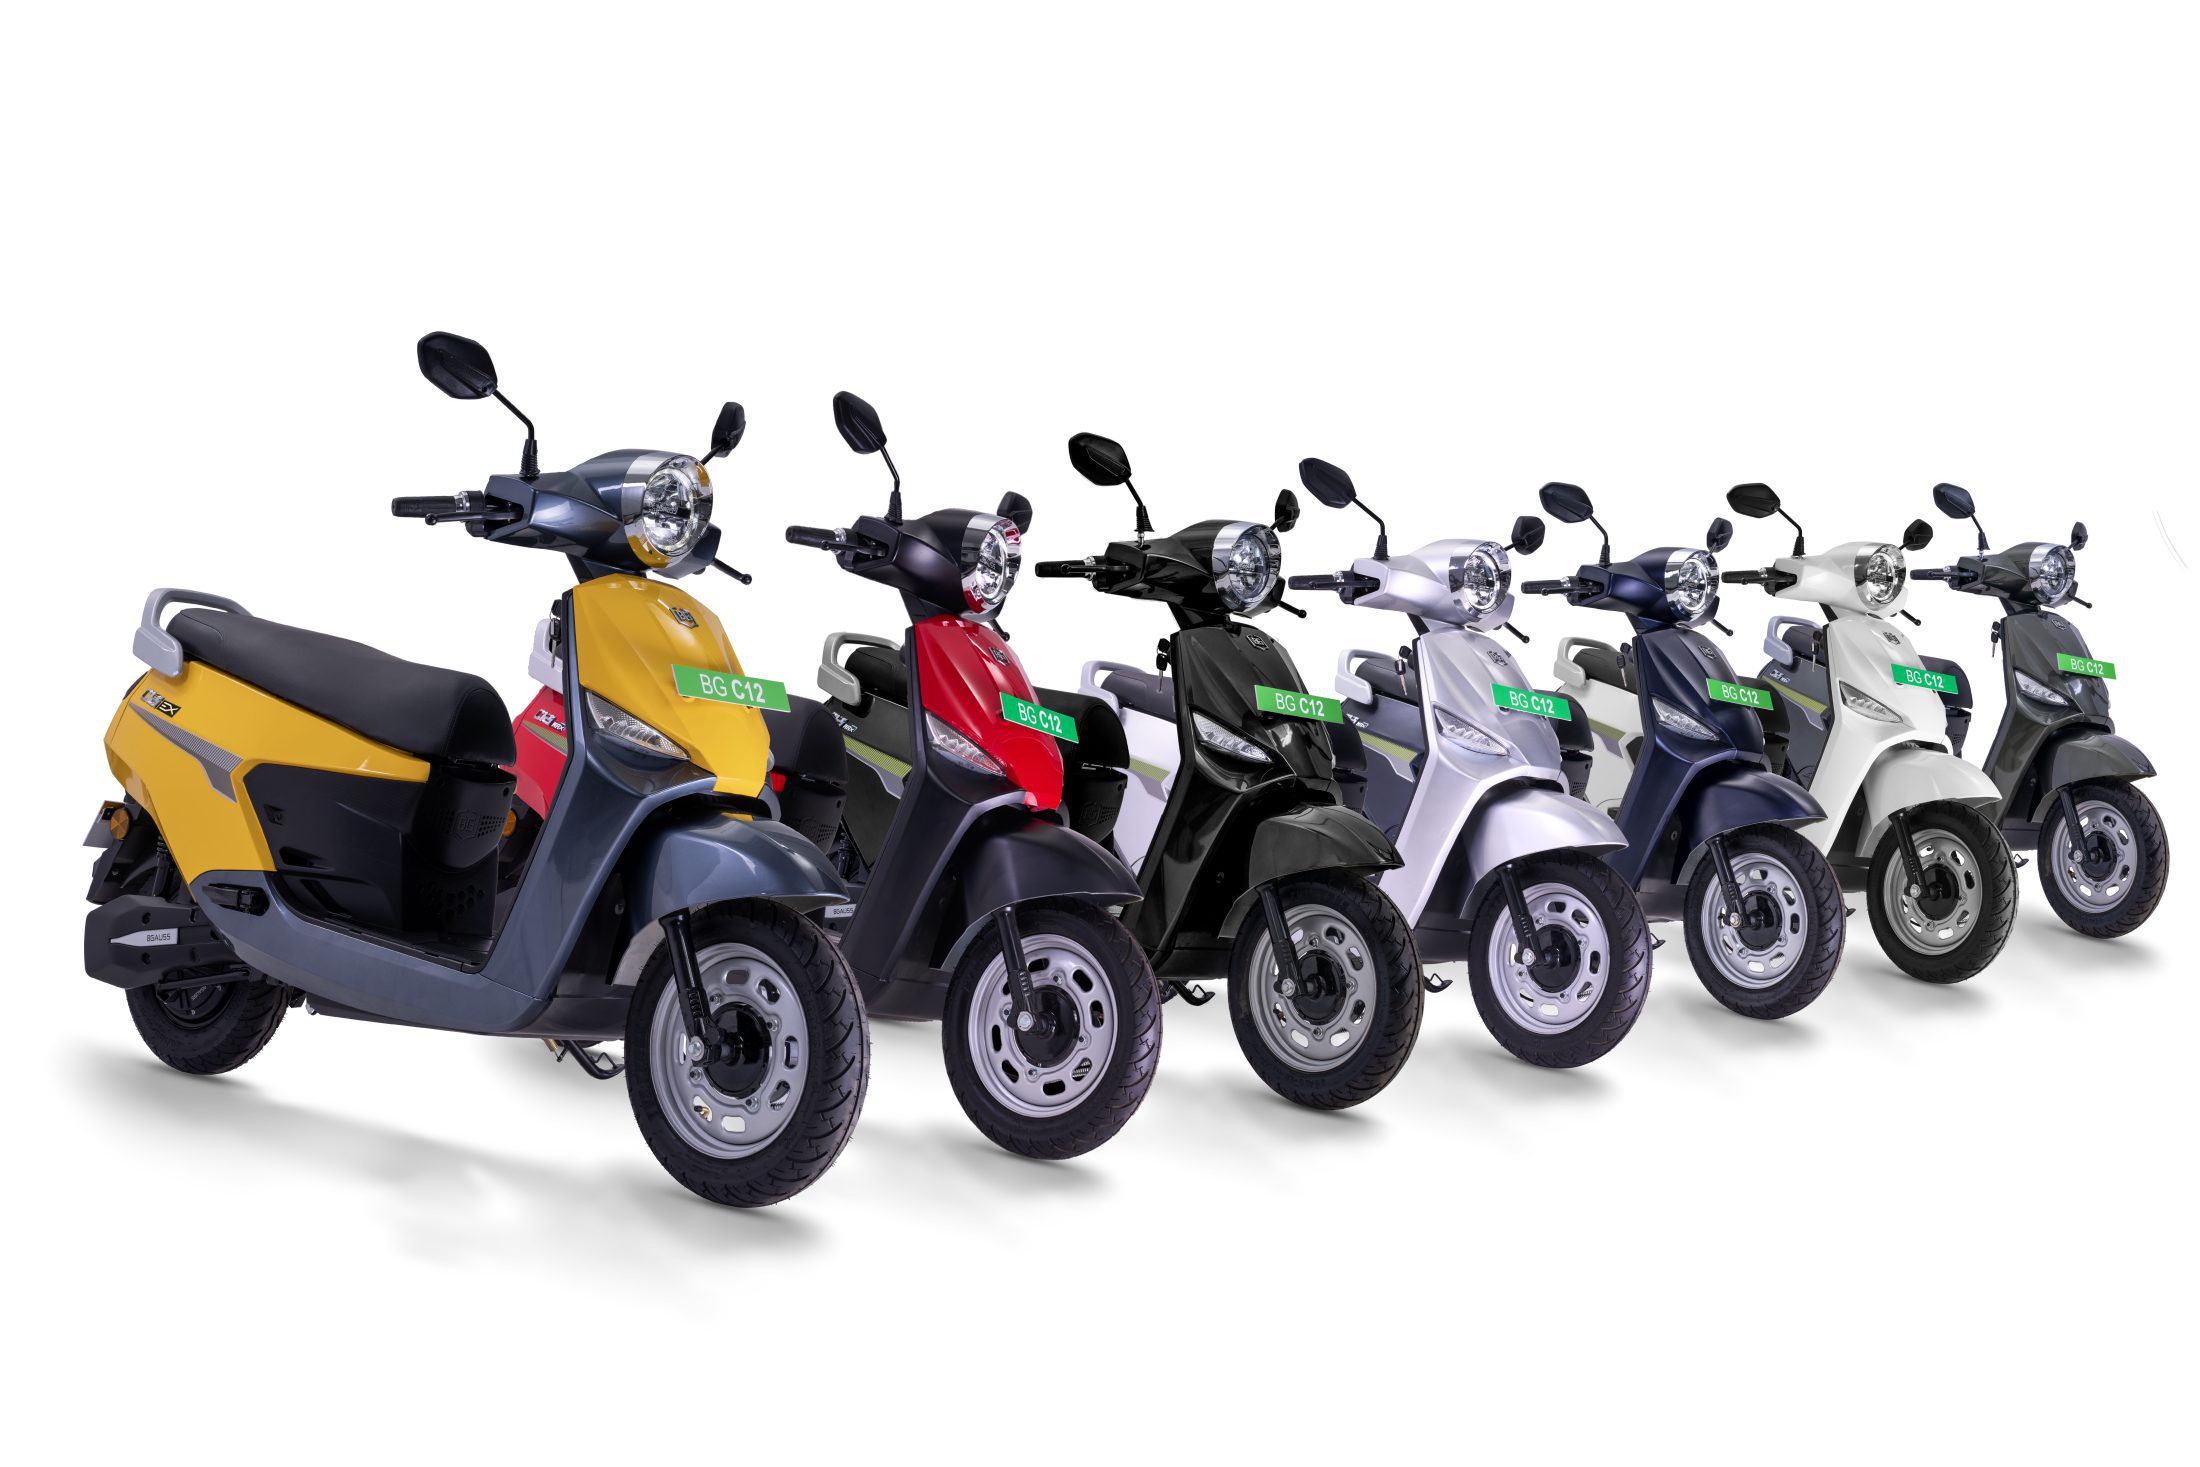 https://e-vehicleinfo.com/bgauss-c12i-ex-electric-scooter-launched-in-india-at-rs-99999/